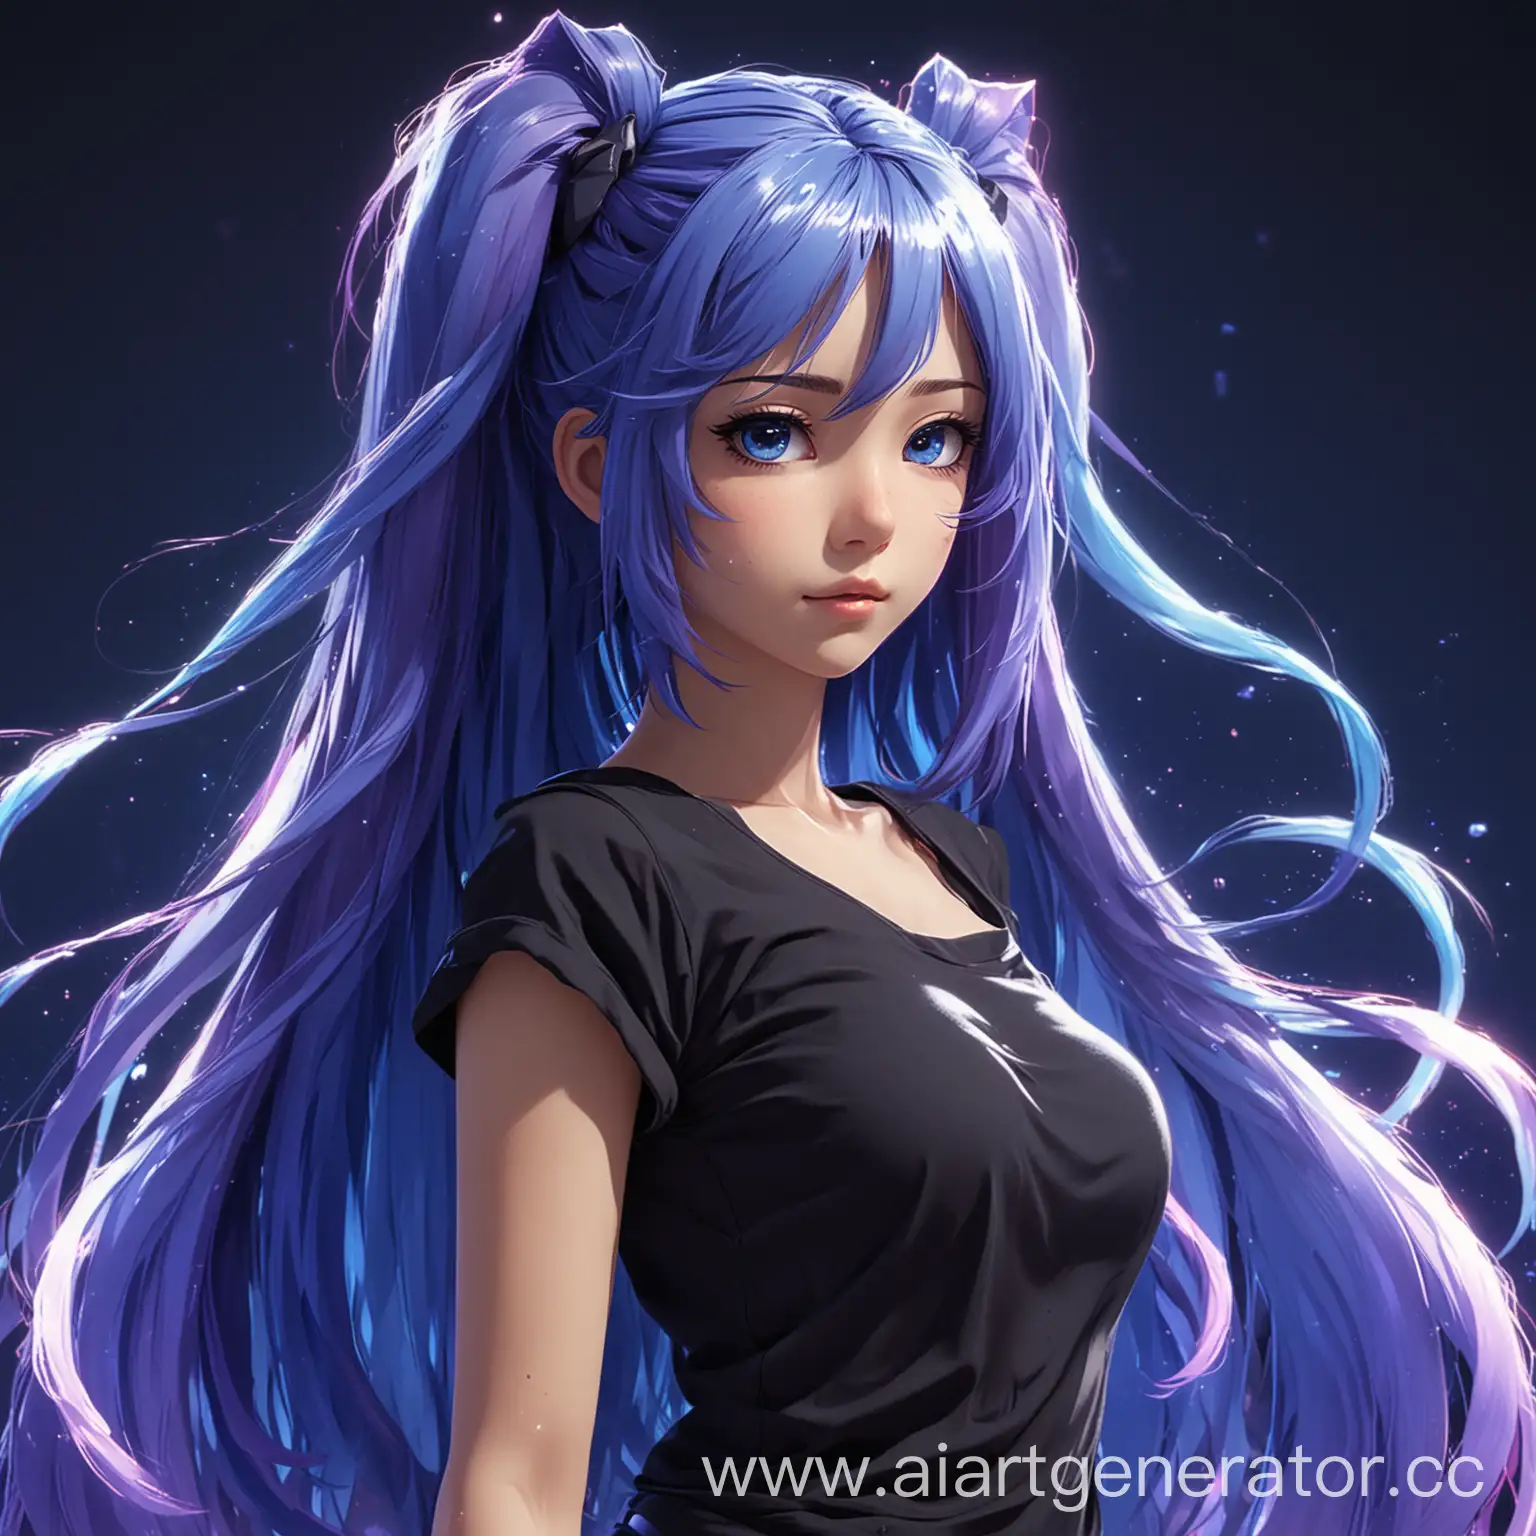 Futuristic-Anime-Character-with-Long-Blue-Hair-in-Black-Top-against-Abstract-Blue-and-Purple-Background